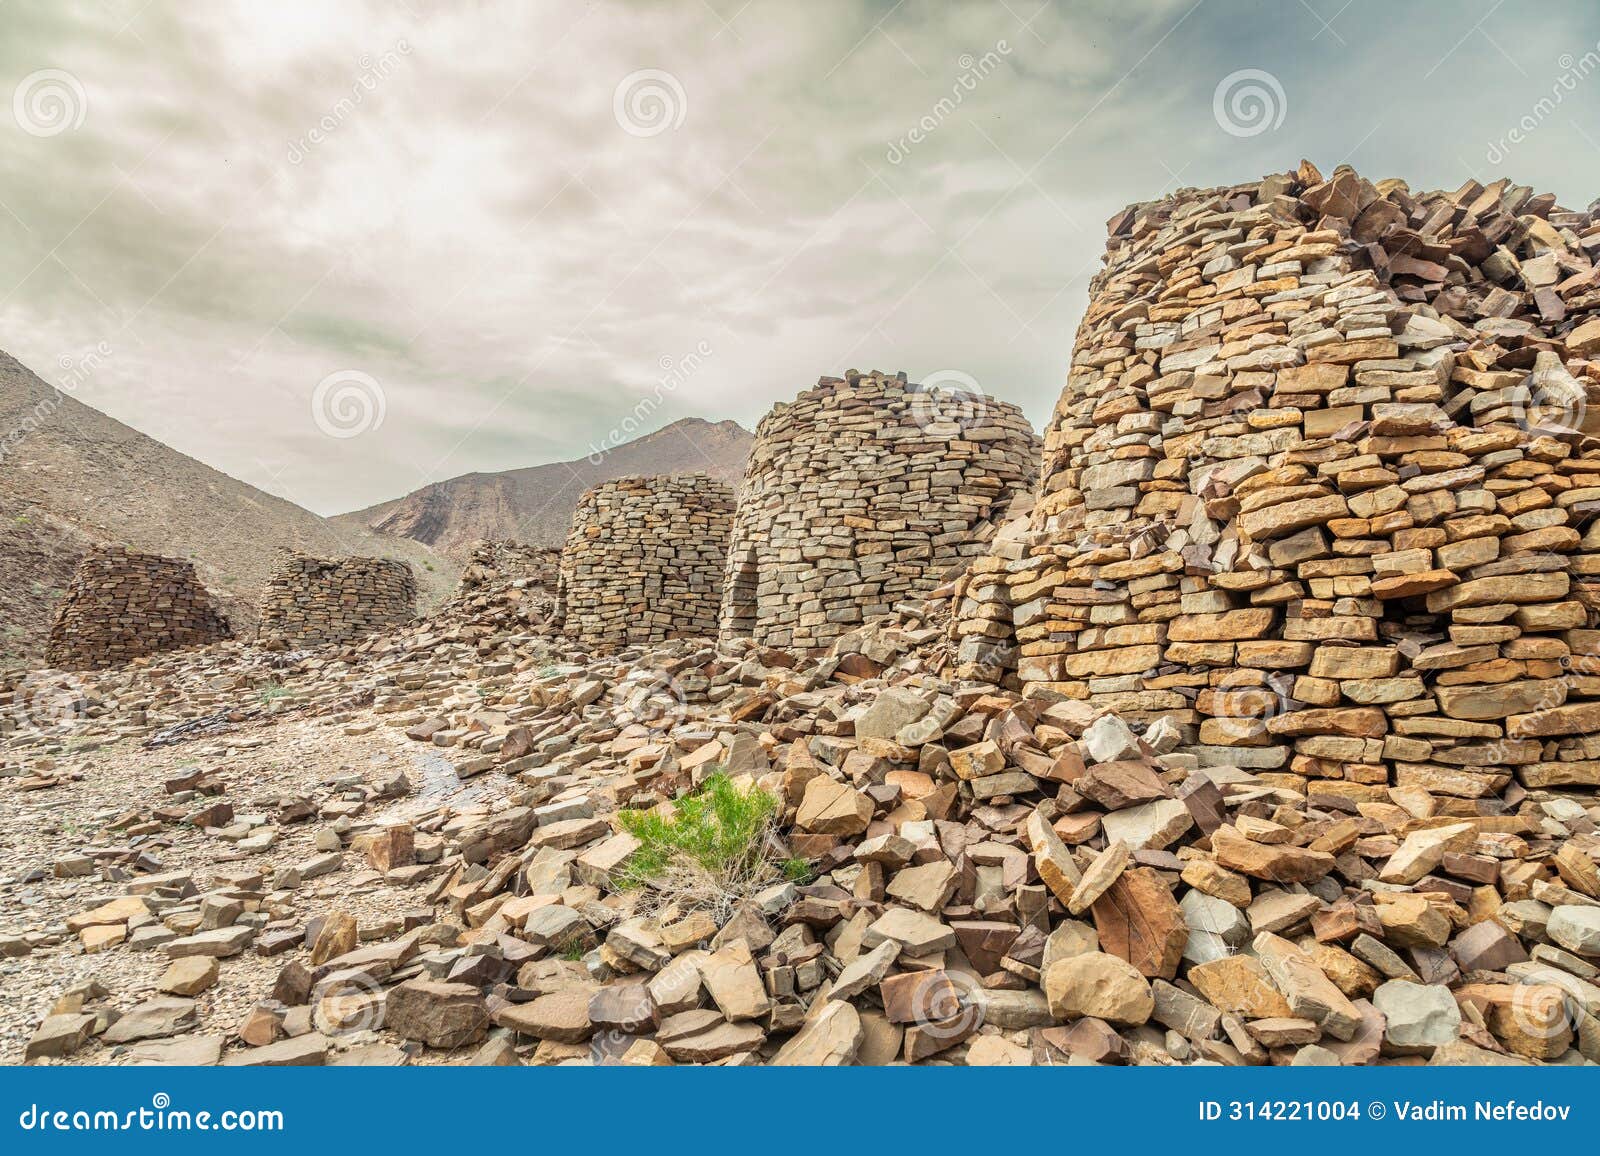 ancient stone beehive tombs with jebel misht mountain in the background, archaeological site near al-ayn, sultanate oman